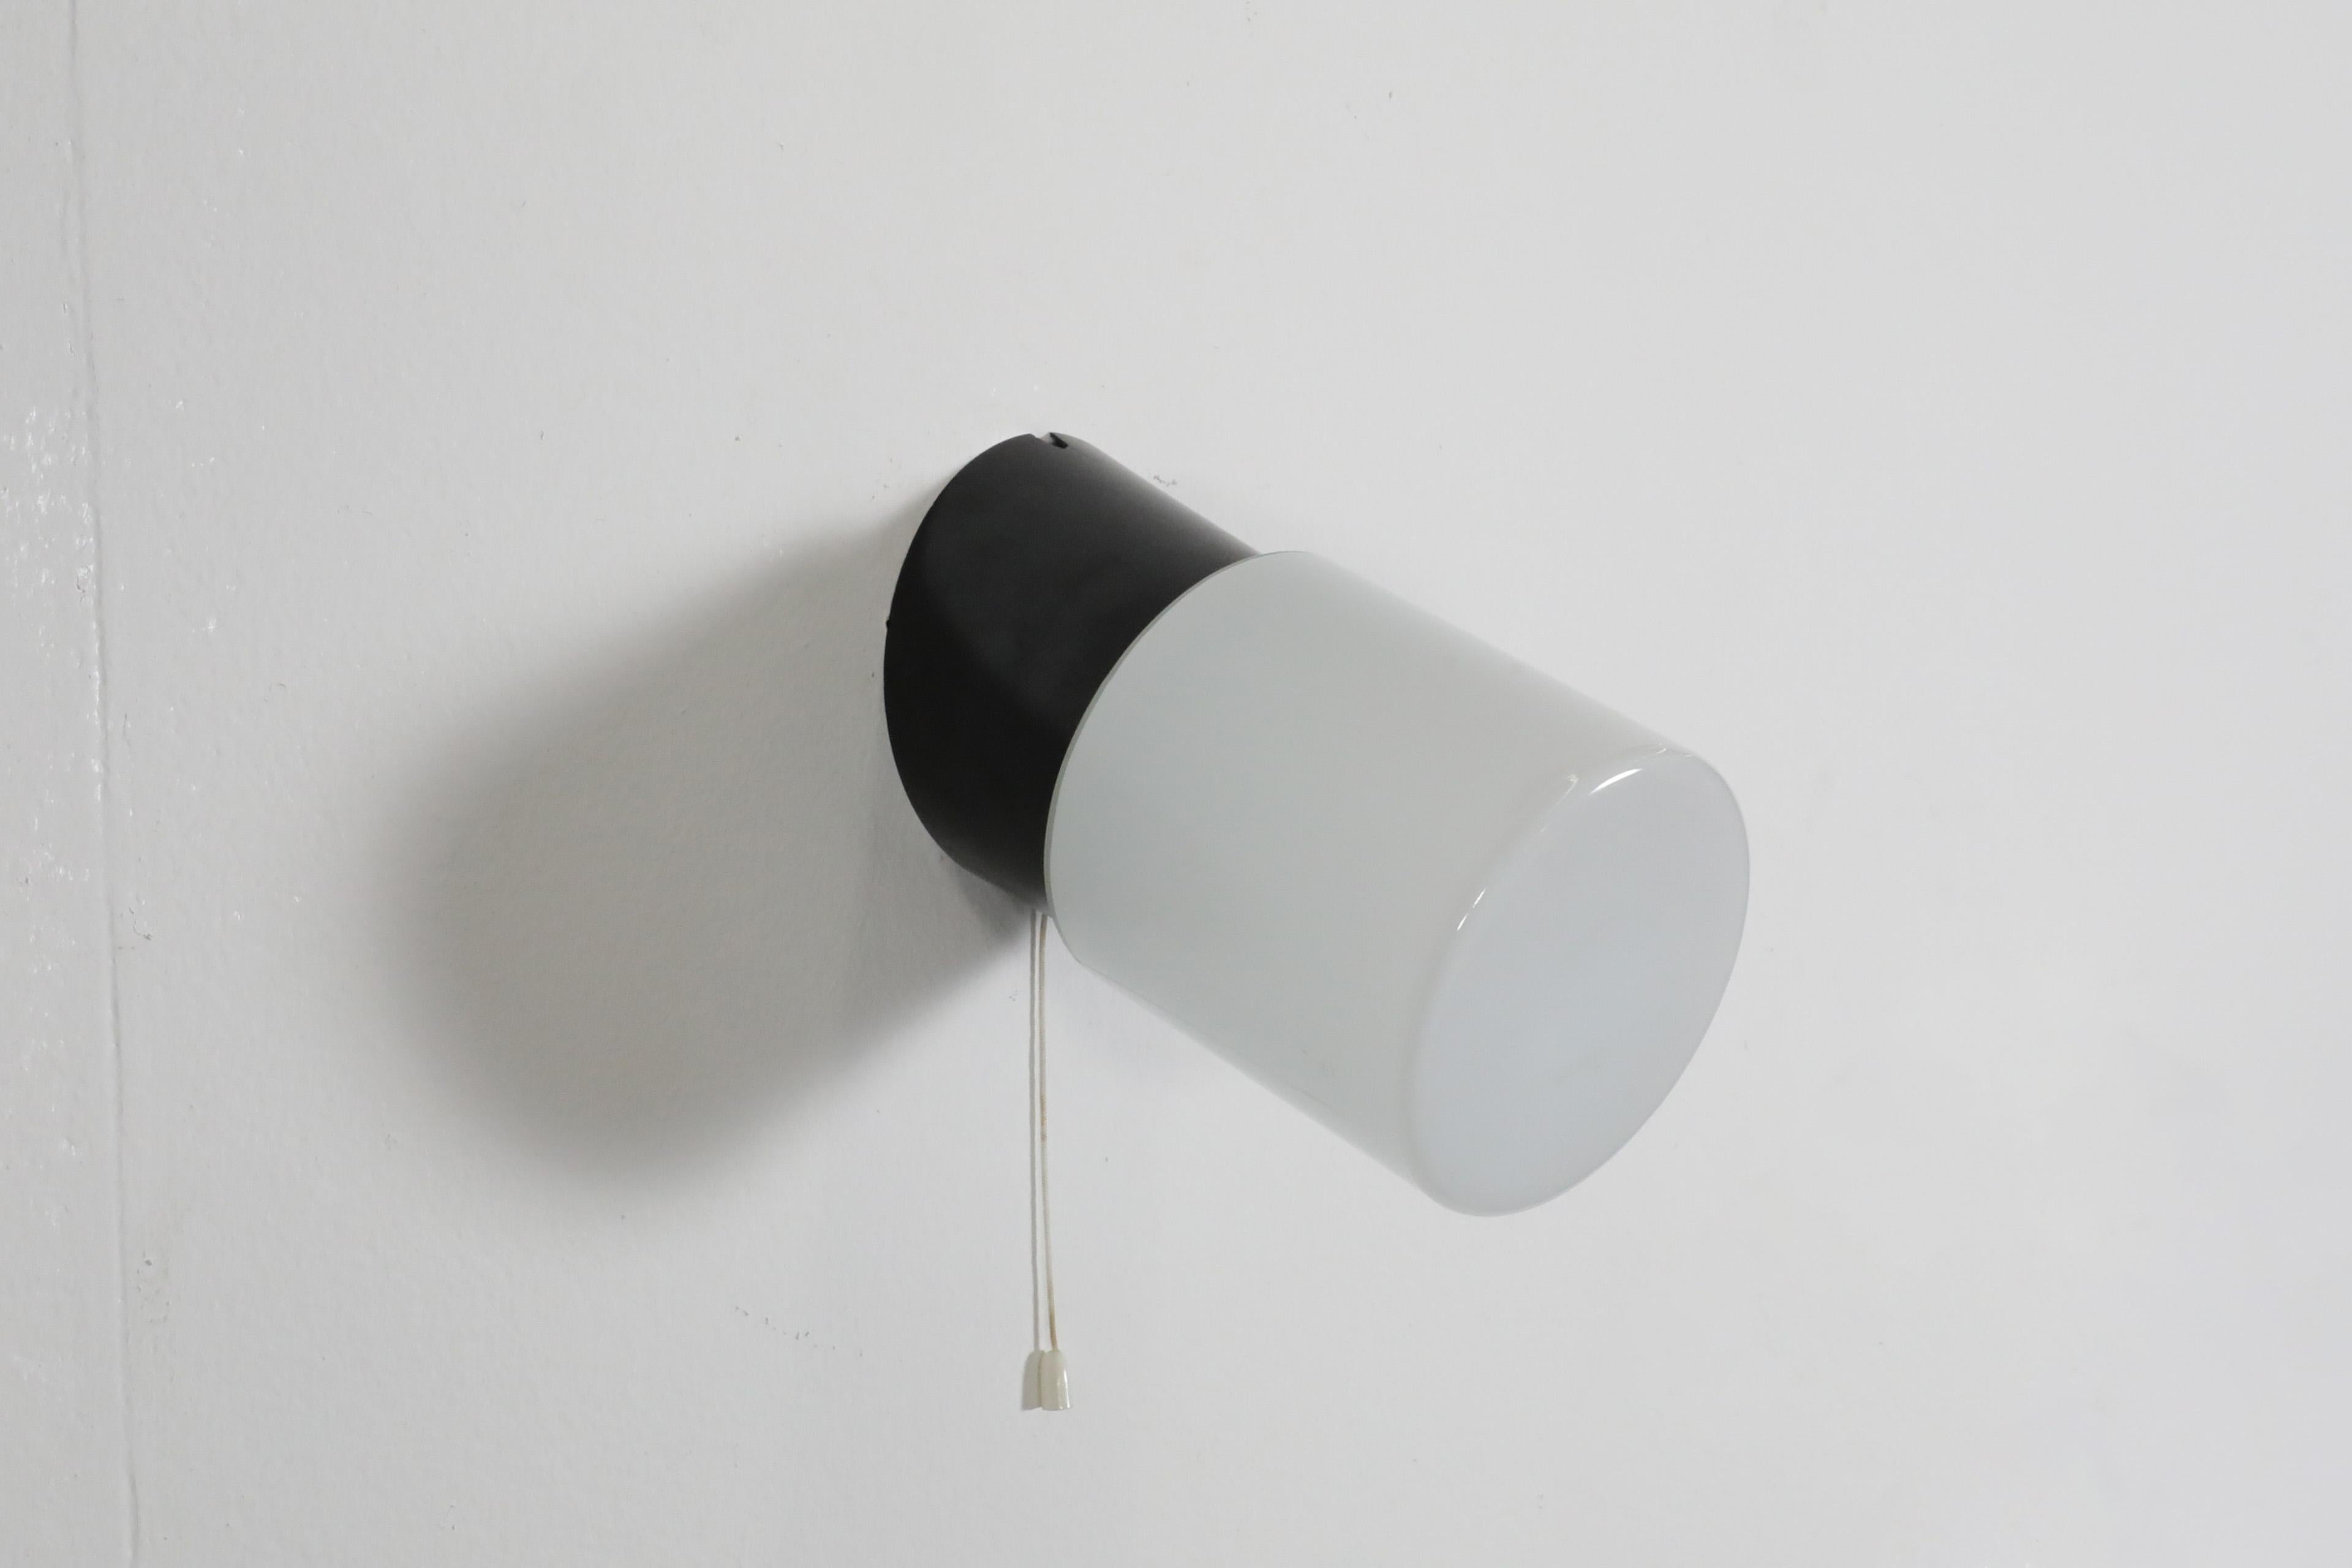 Cylinder Milk Glass Sconce with Black Bakelite Base and Pull String Switch For Sale 2